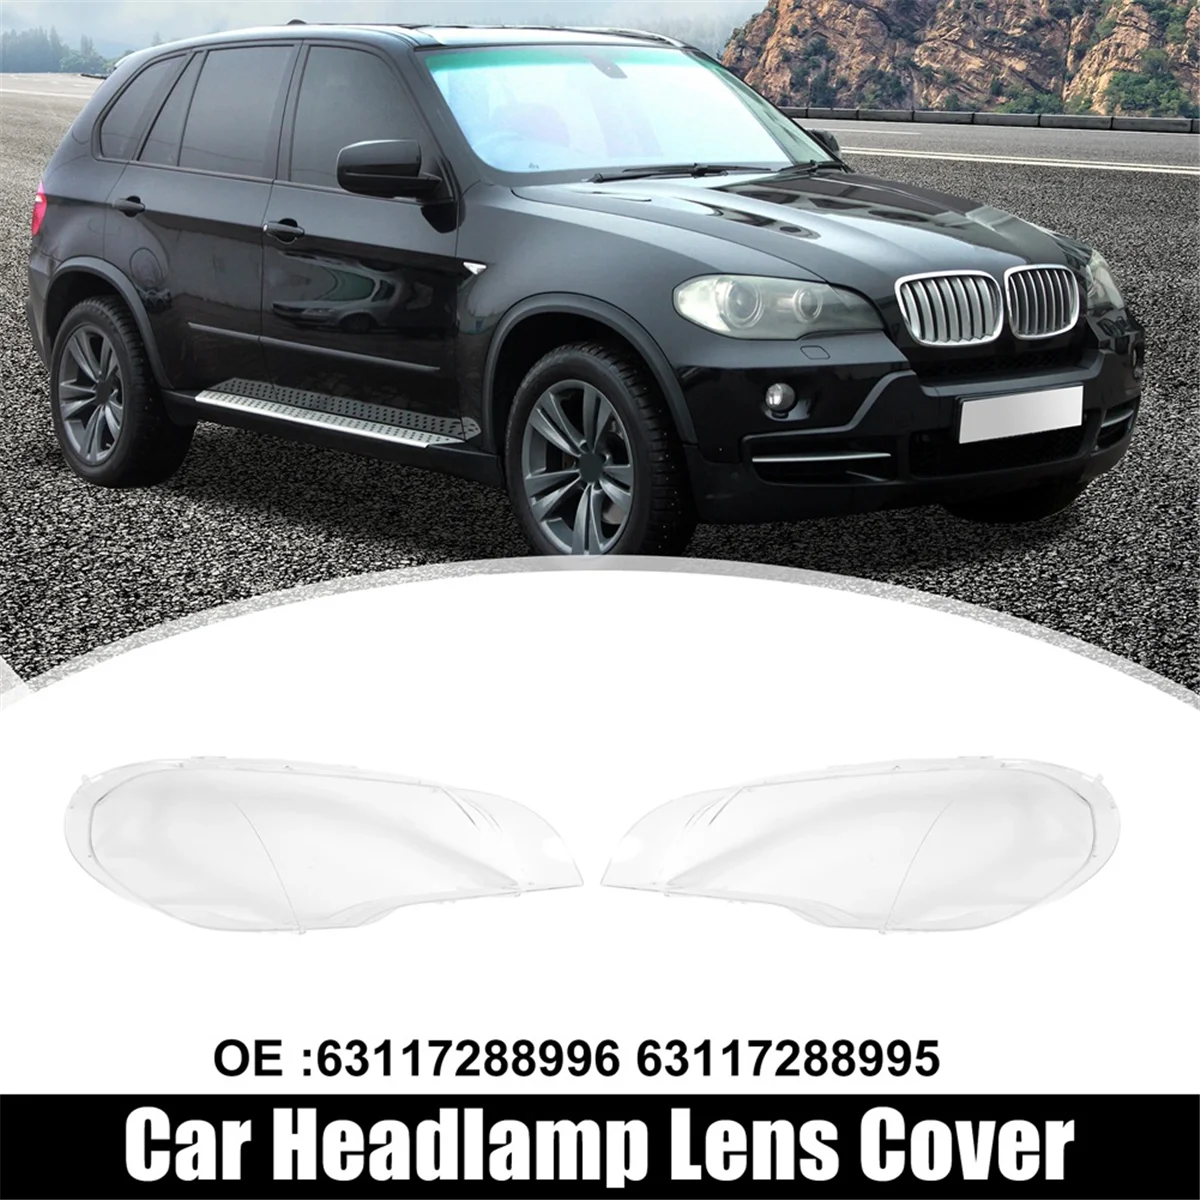 

Left Front Headlight Cover Head Light Lamp Lampshade for BMW X5 E70 2007-2013 Headlight Lens Cover